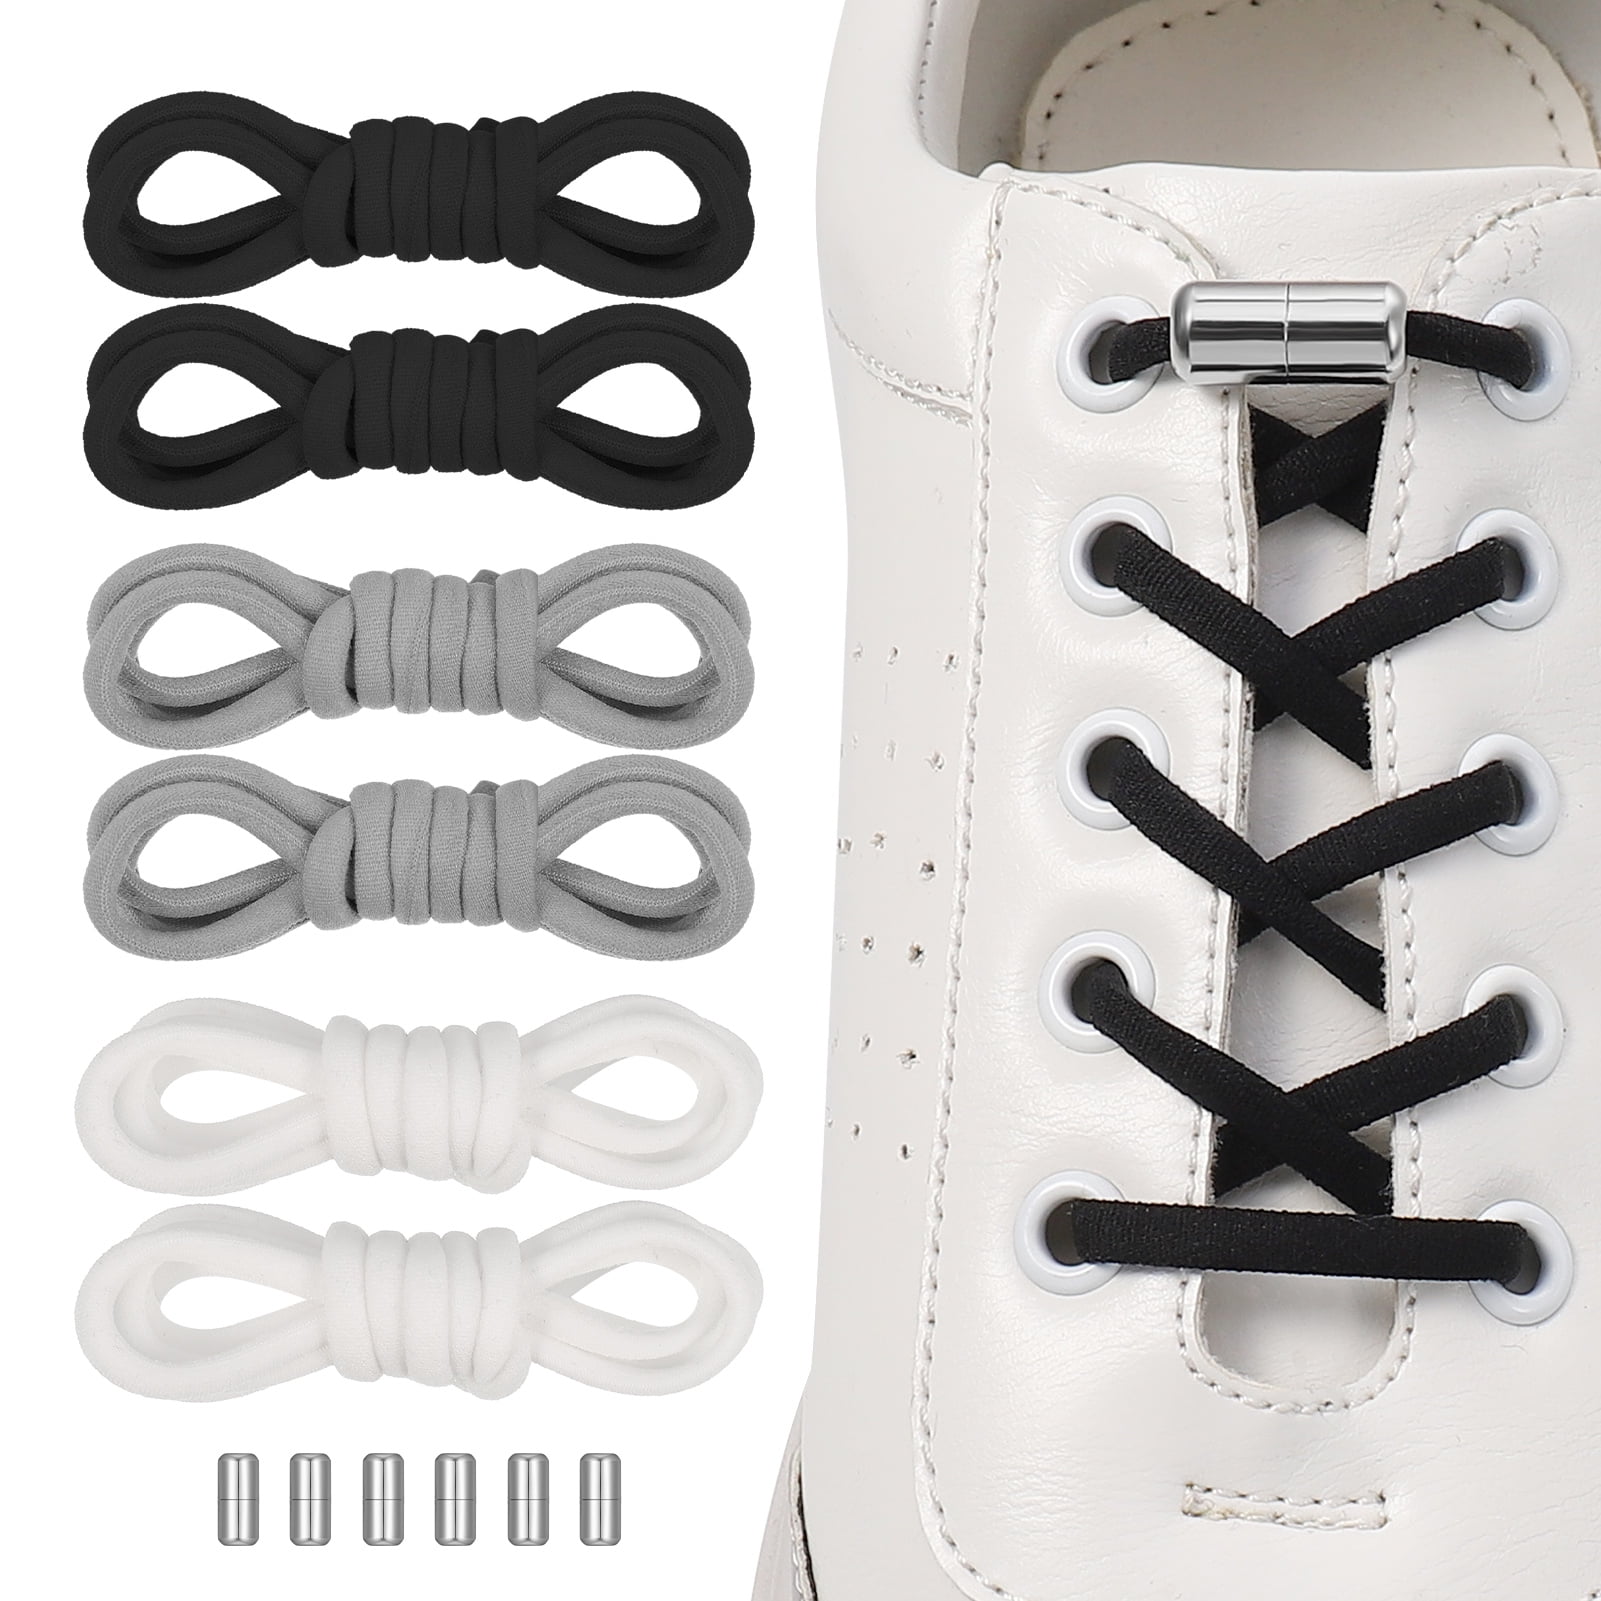 BEST NO TIE Shoelaces Stretchy Elastic Laces Fits Any Shoes 